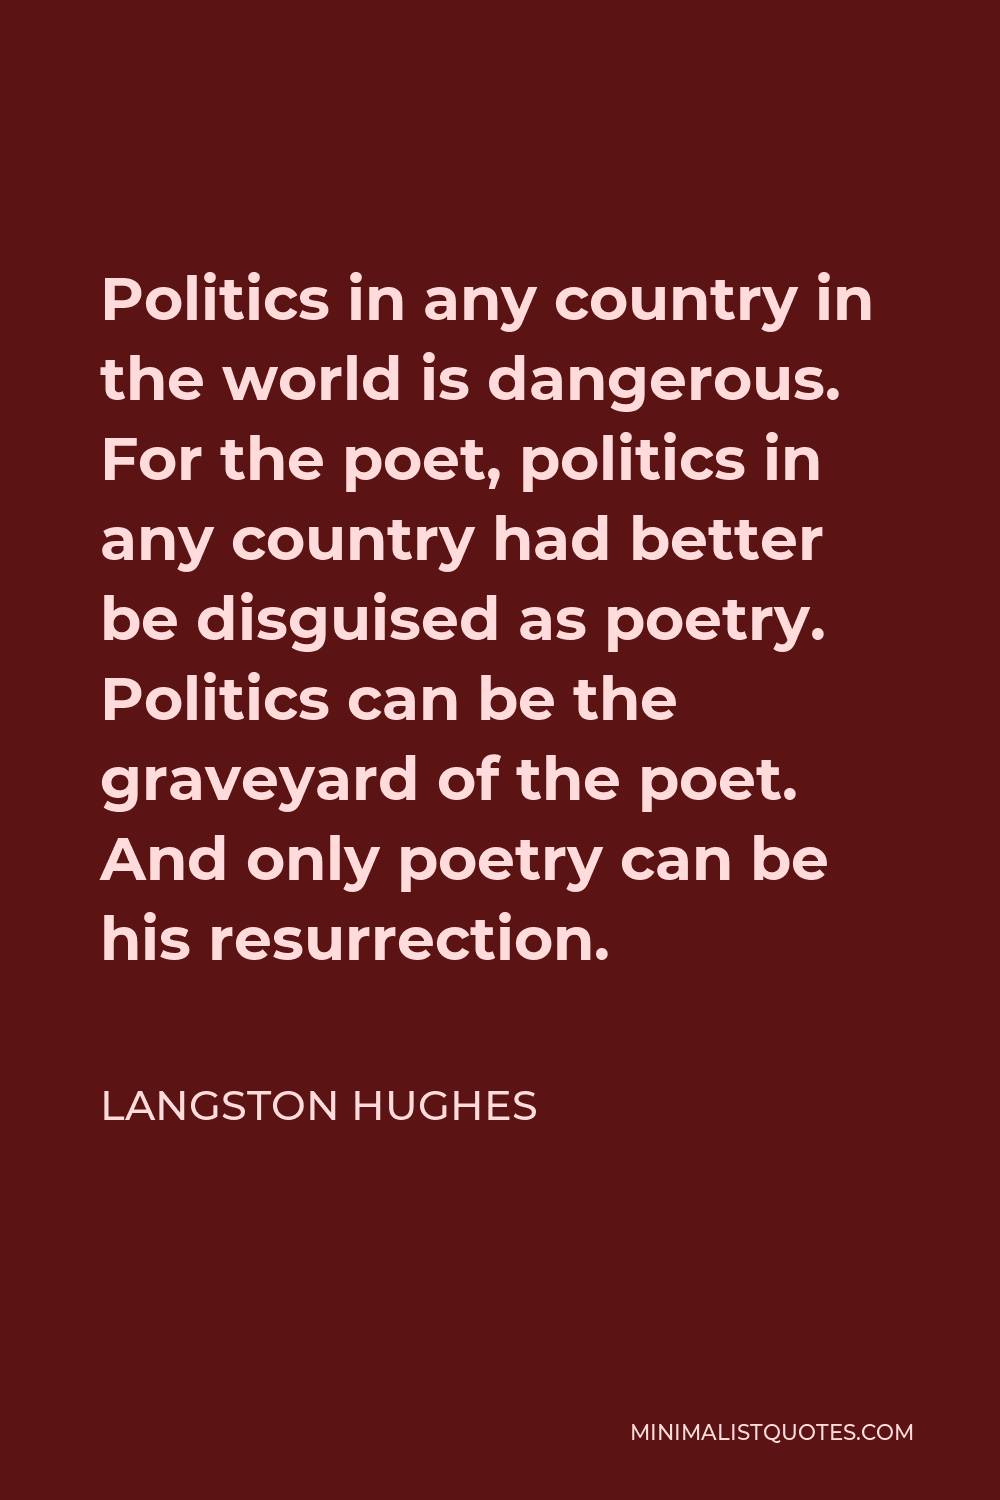 Langston Hughes Quote - Politics in any country in the world is dangerous. For the poet, politics in any country had better be disguised as poetry. Politics can be the graveyard of the poet. And only poetry can be his resurrection.